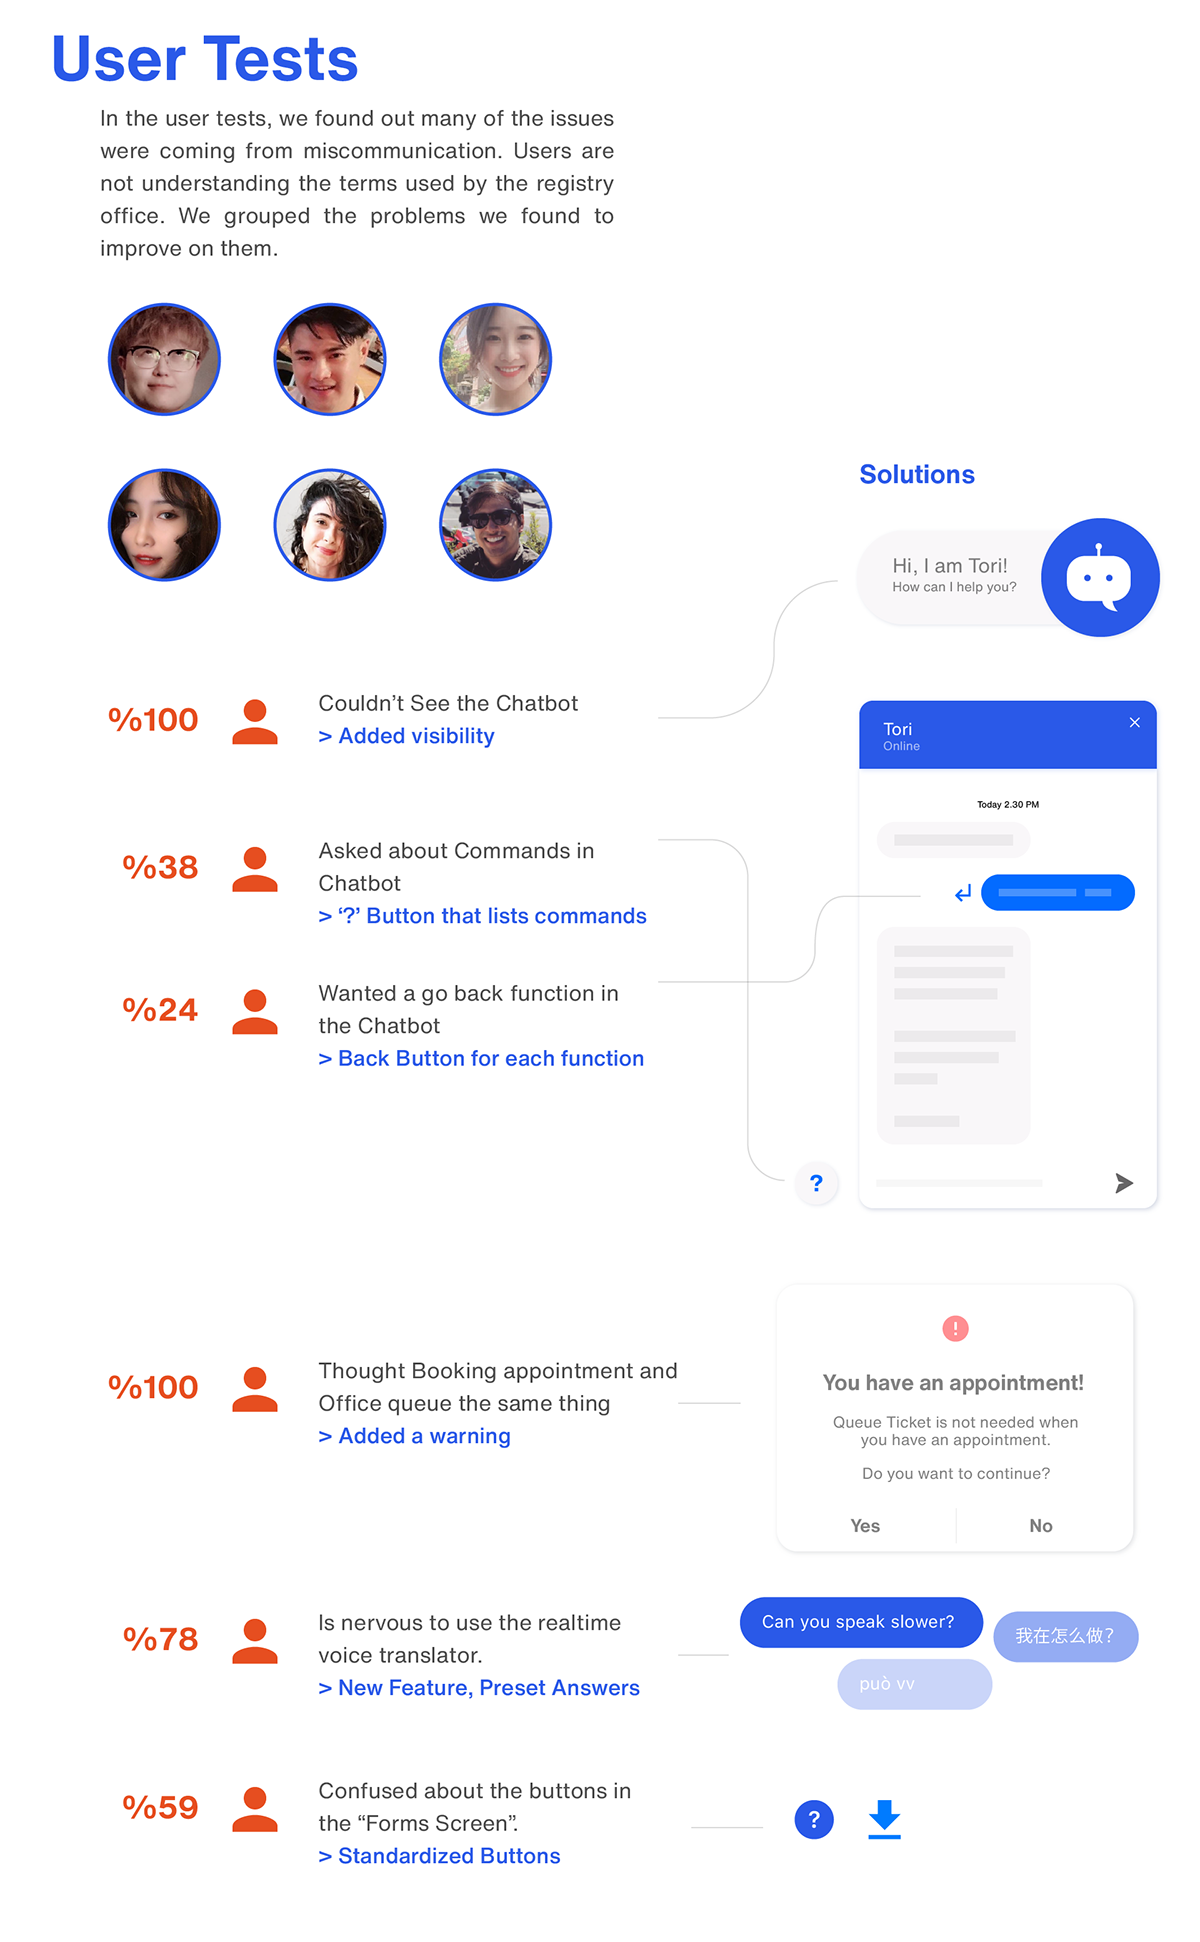 ux UI service design interaction IxD product app Chatbot system